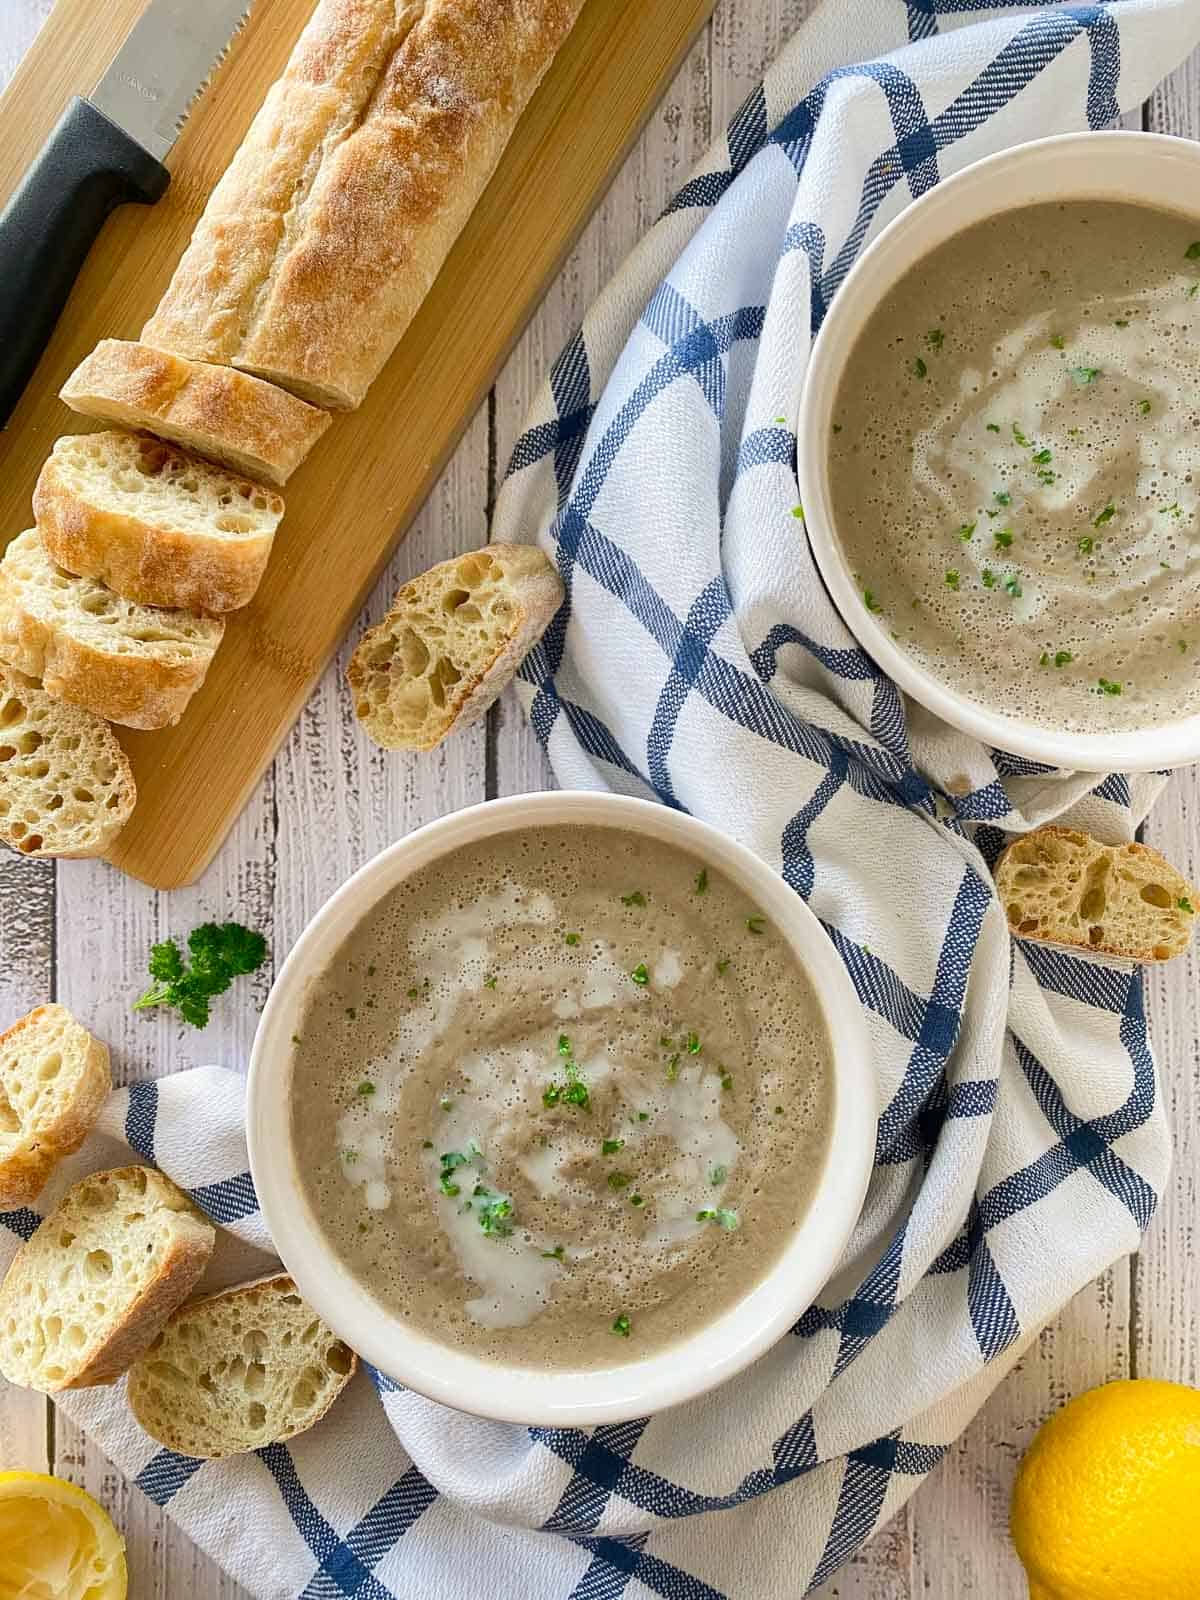 Two bowls filled with mushroom soup and parsley garnish with bread on the side.